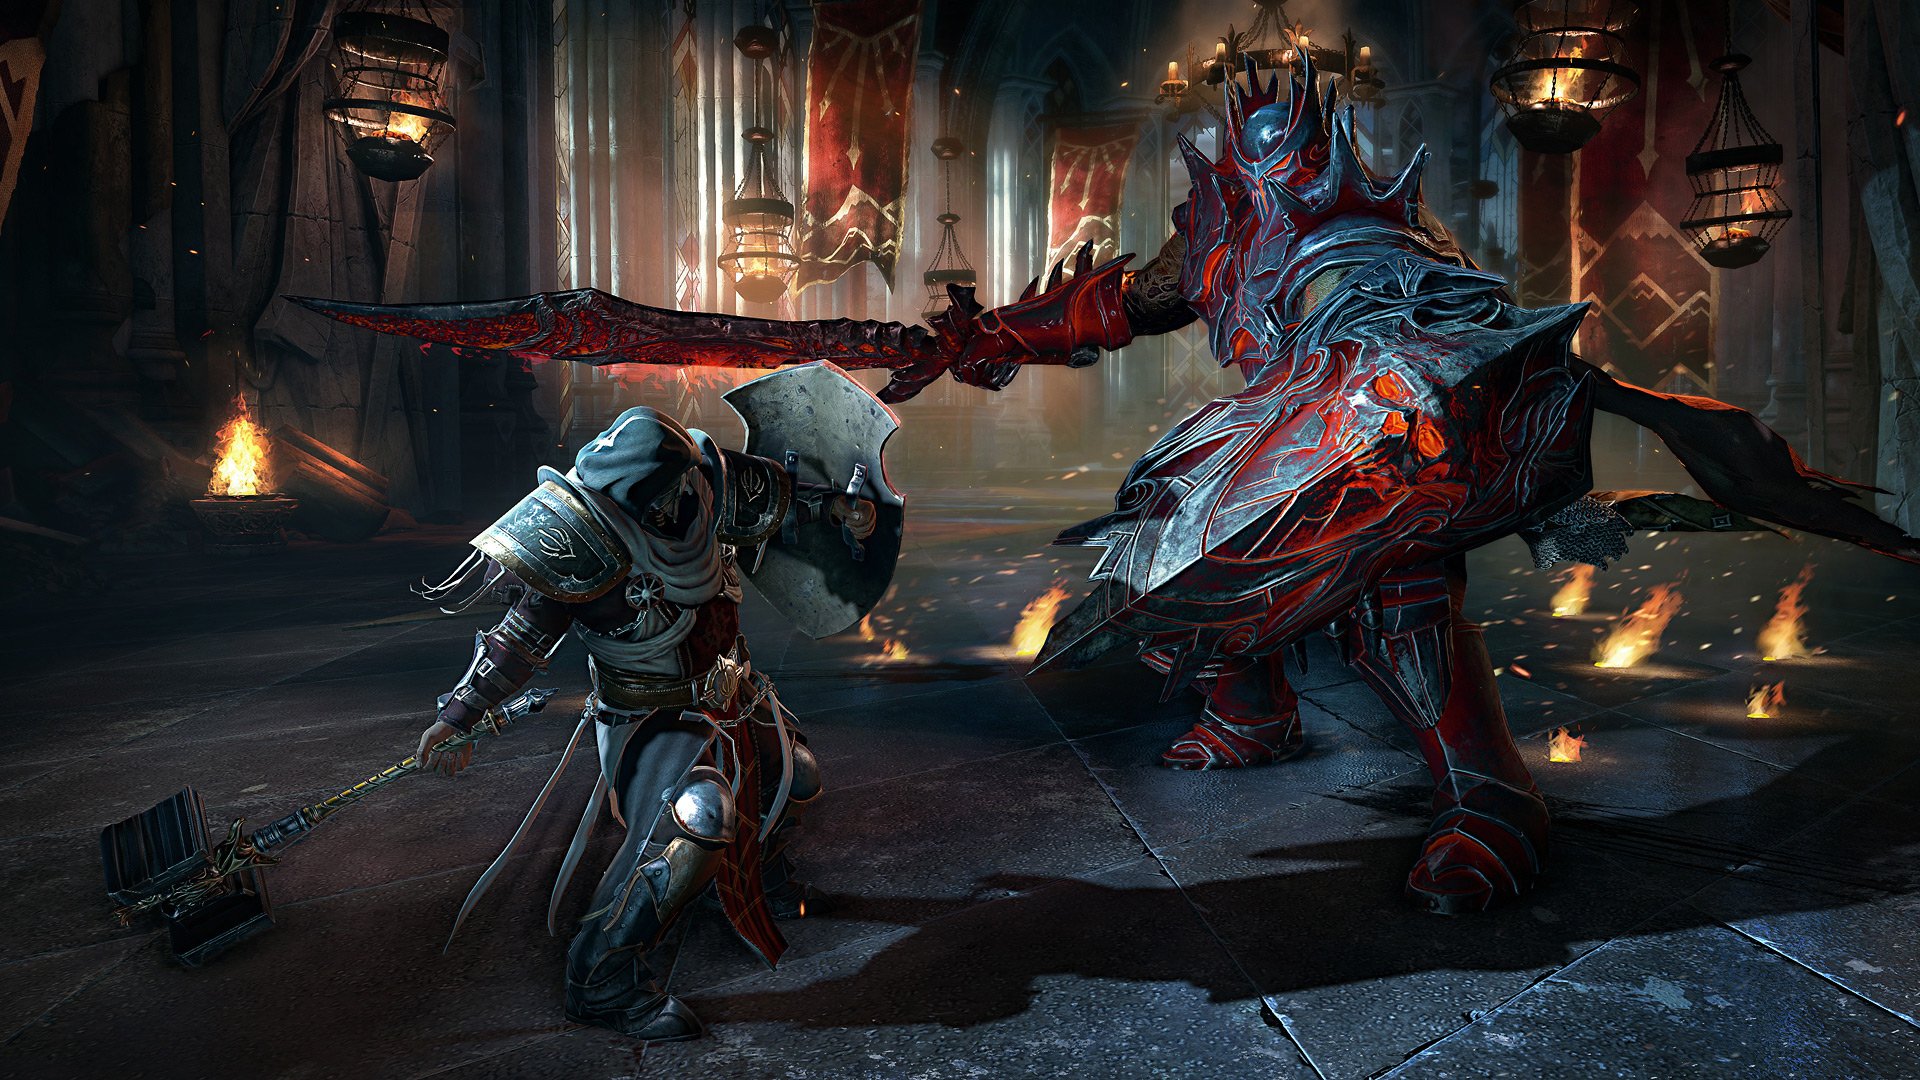 Скриншот 3 к игре Lords of the Fallen Game of the Year Edition v1.0.0 [GOG] (2014)